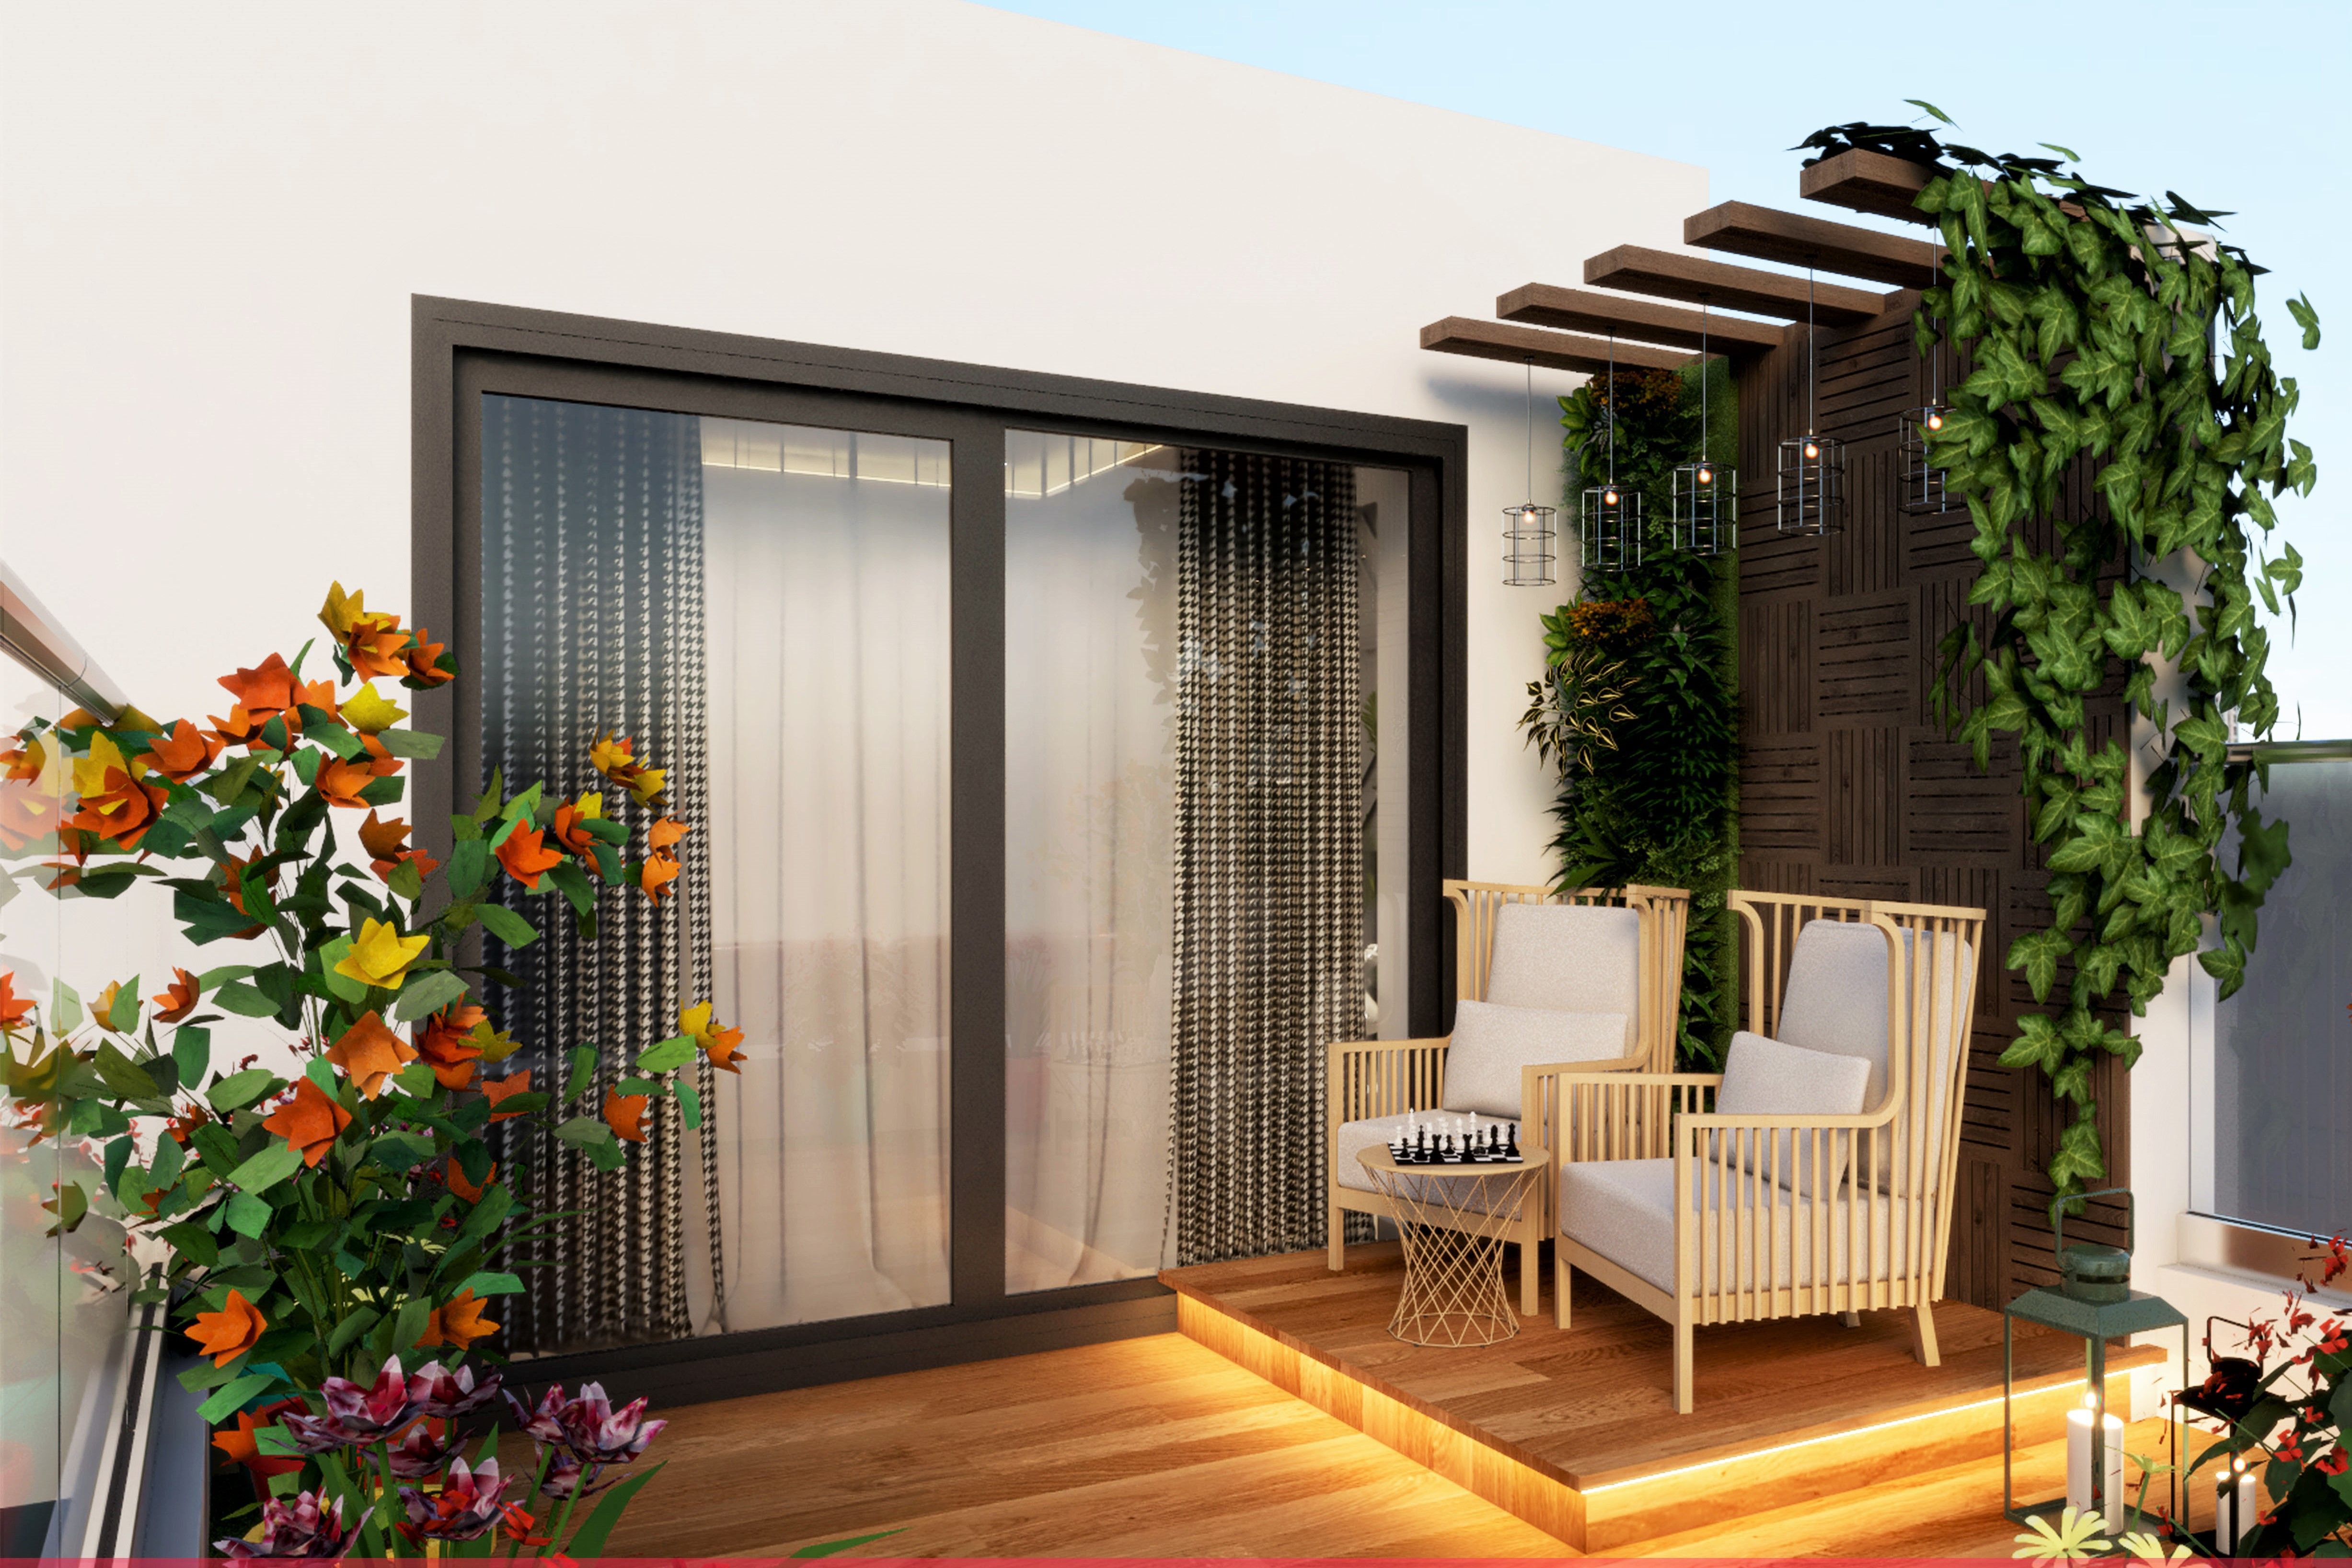 Open Roof Modern Balcony Design Idea with Platform and Plants